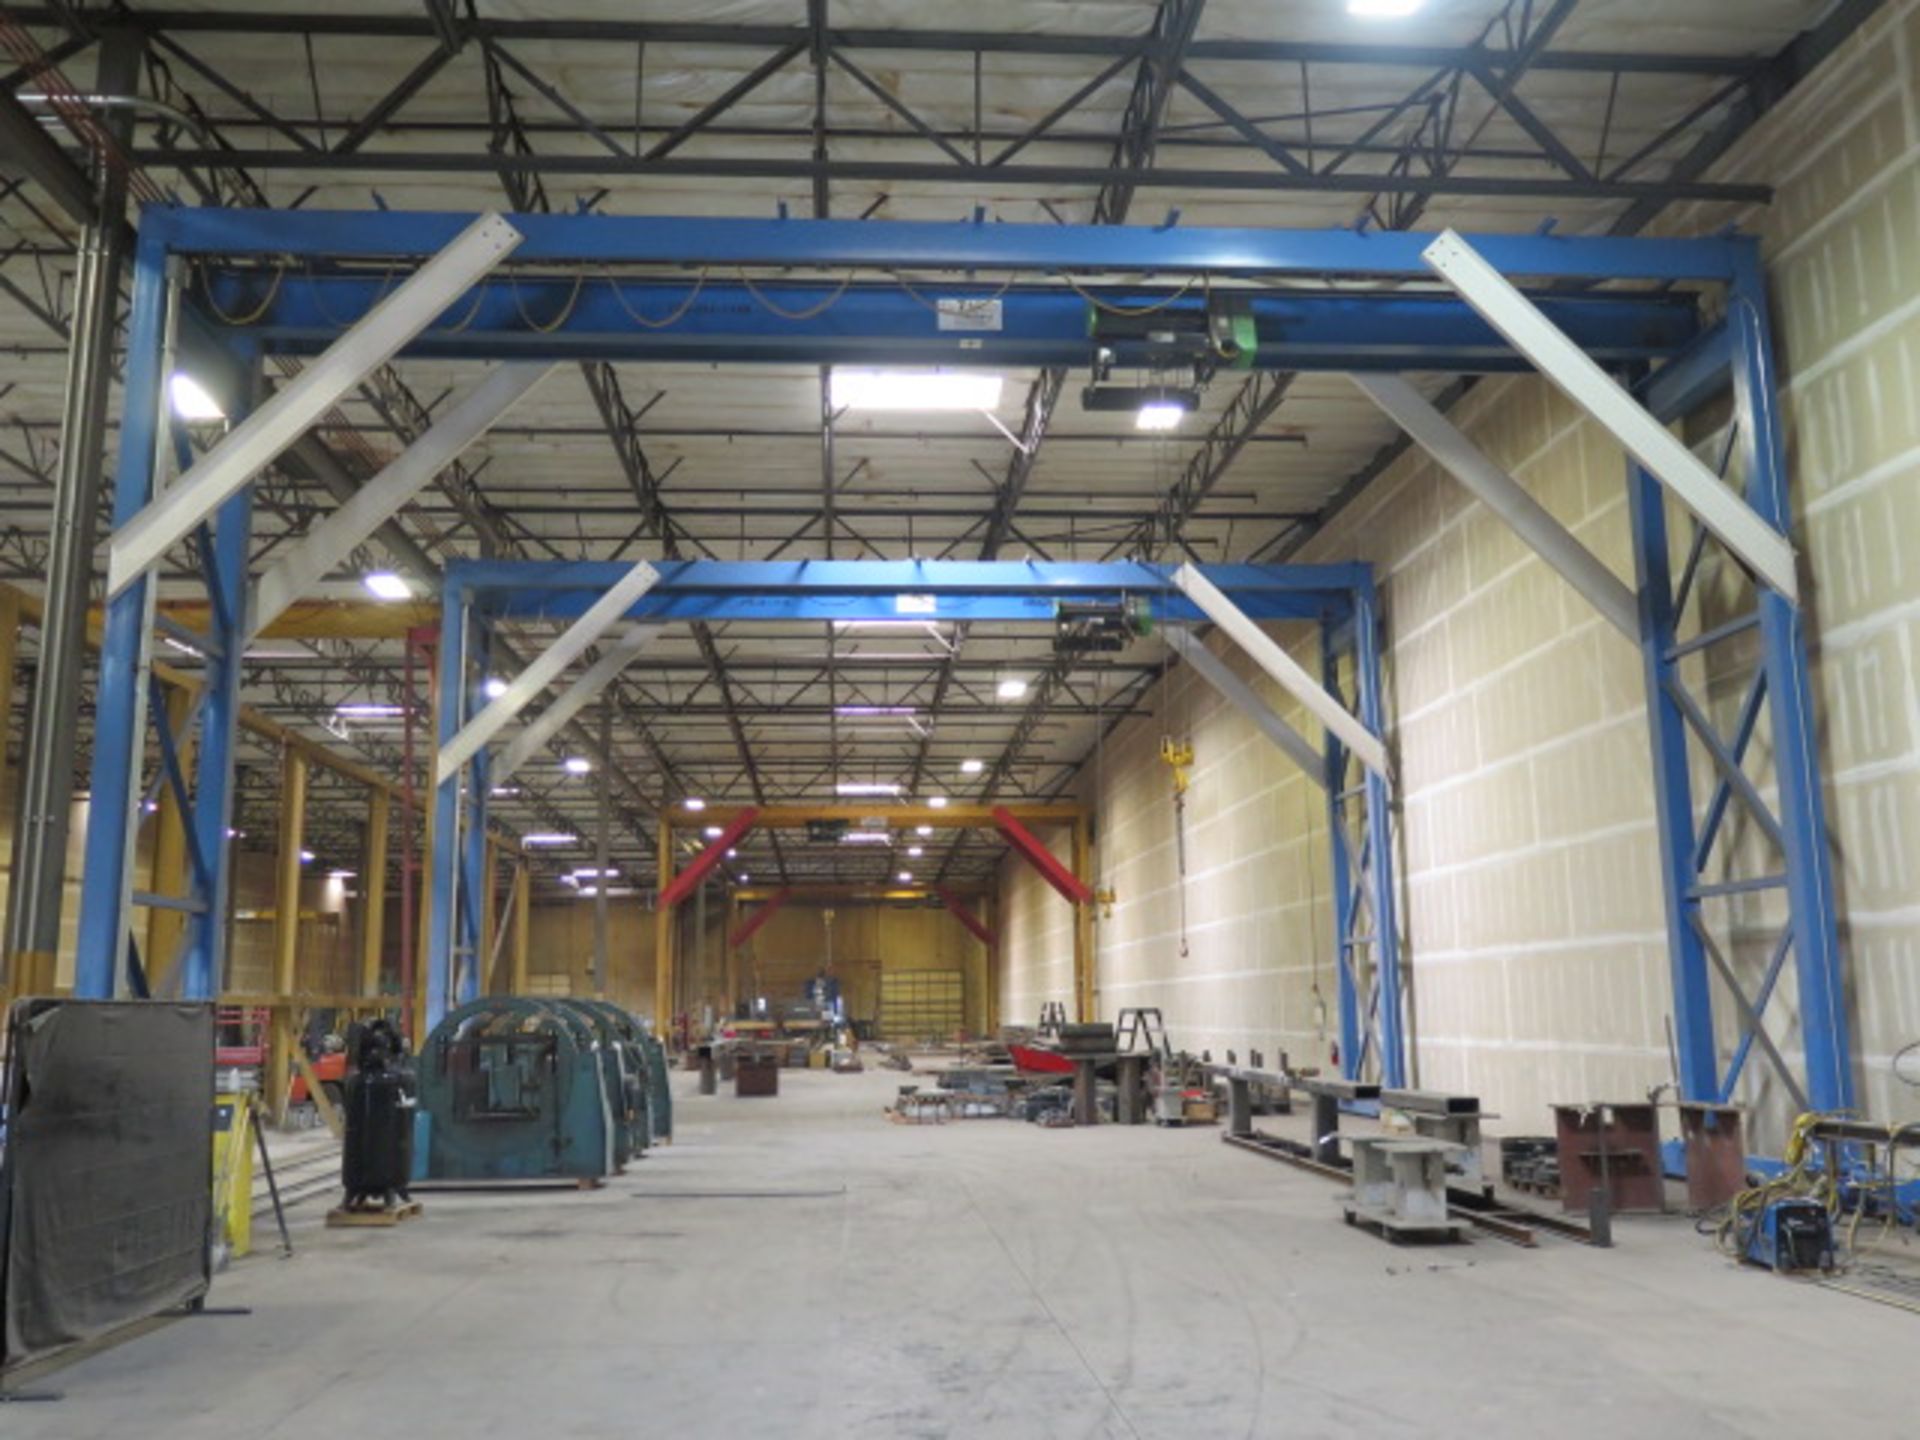 7.5 Ton Cap Rolling Frame Gantry w/ 47’ Span, Remote Control, 80’ Track and Electrical SOLD AS-IS